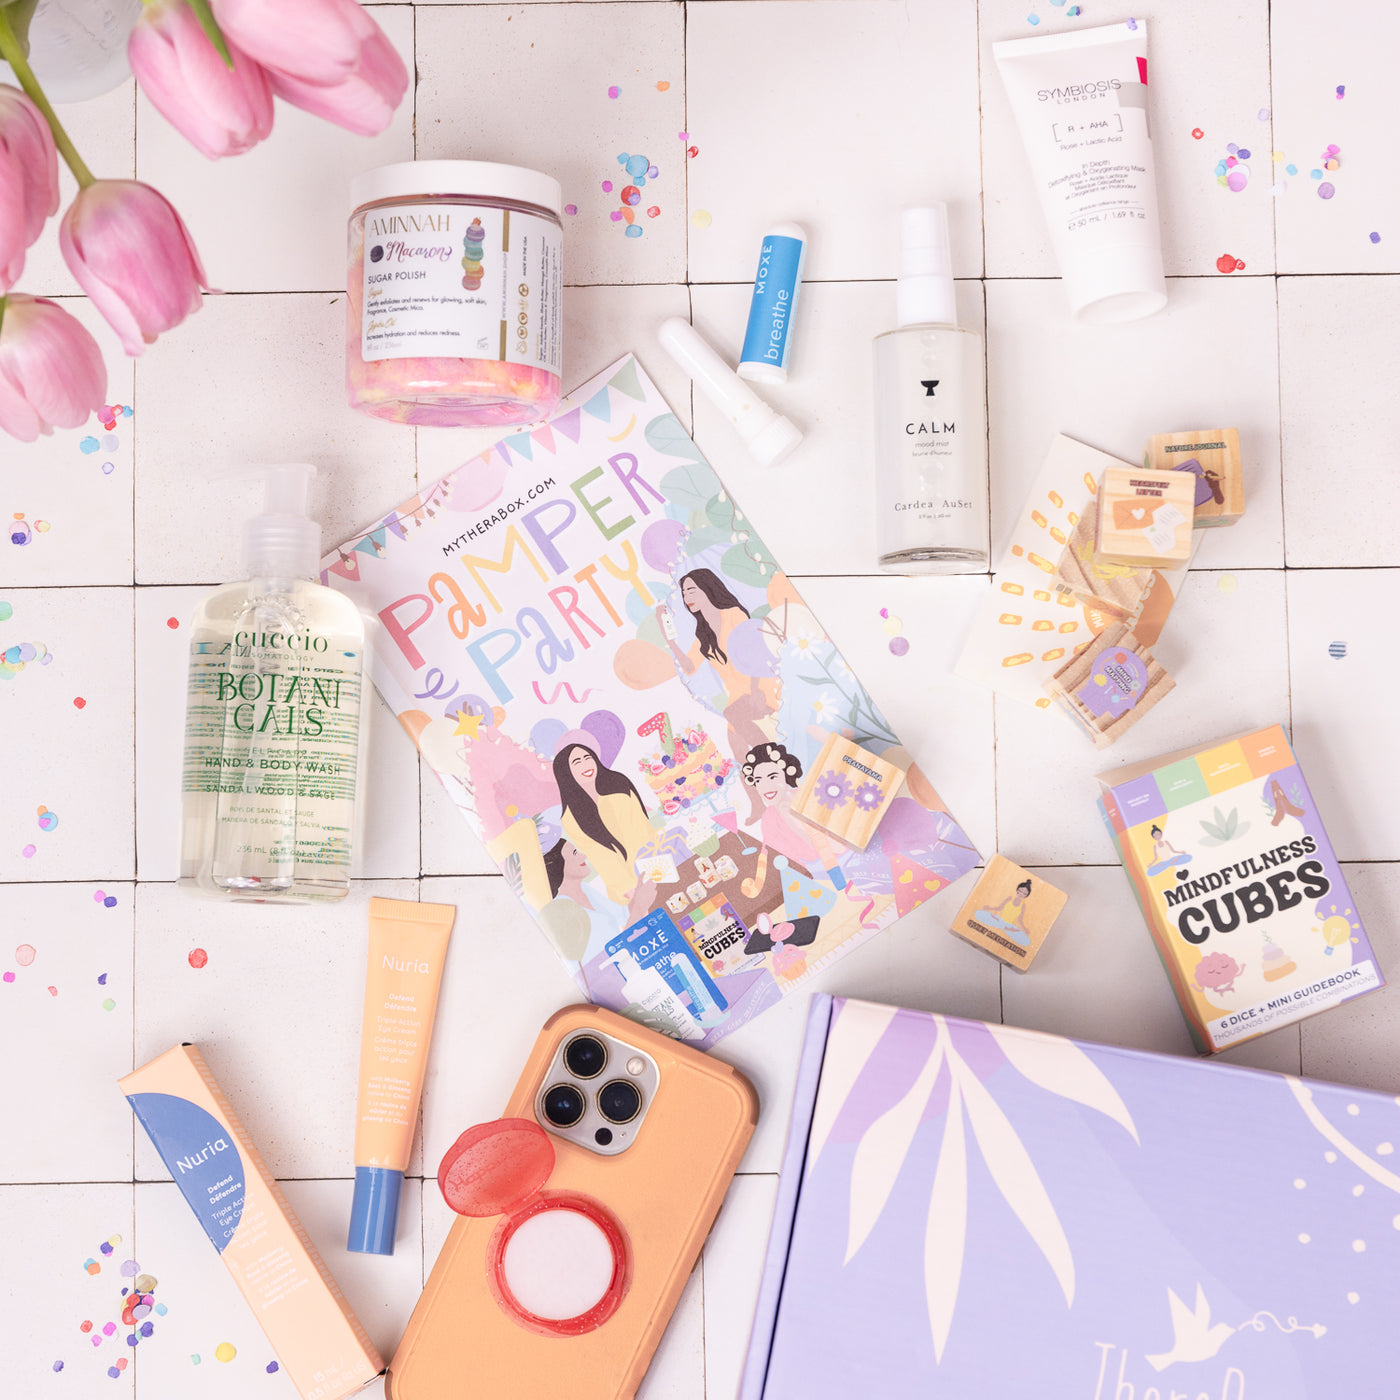 TheraBox Pamper Party Box Items